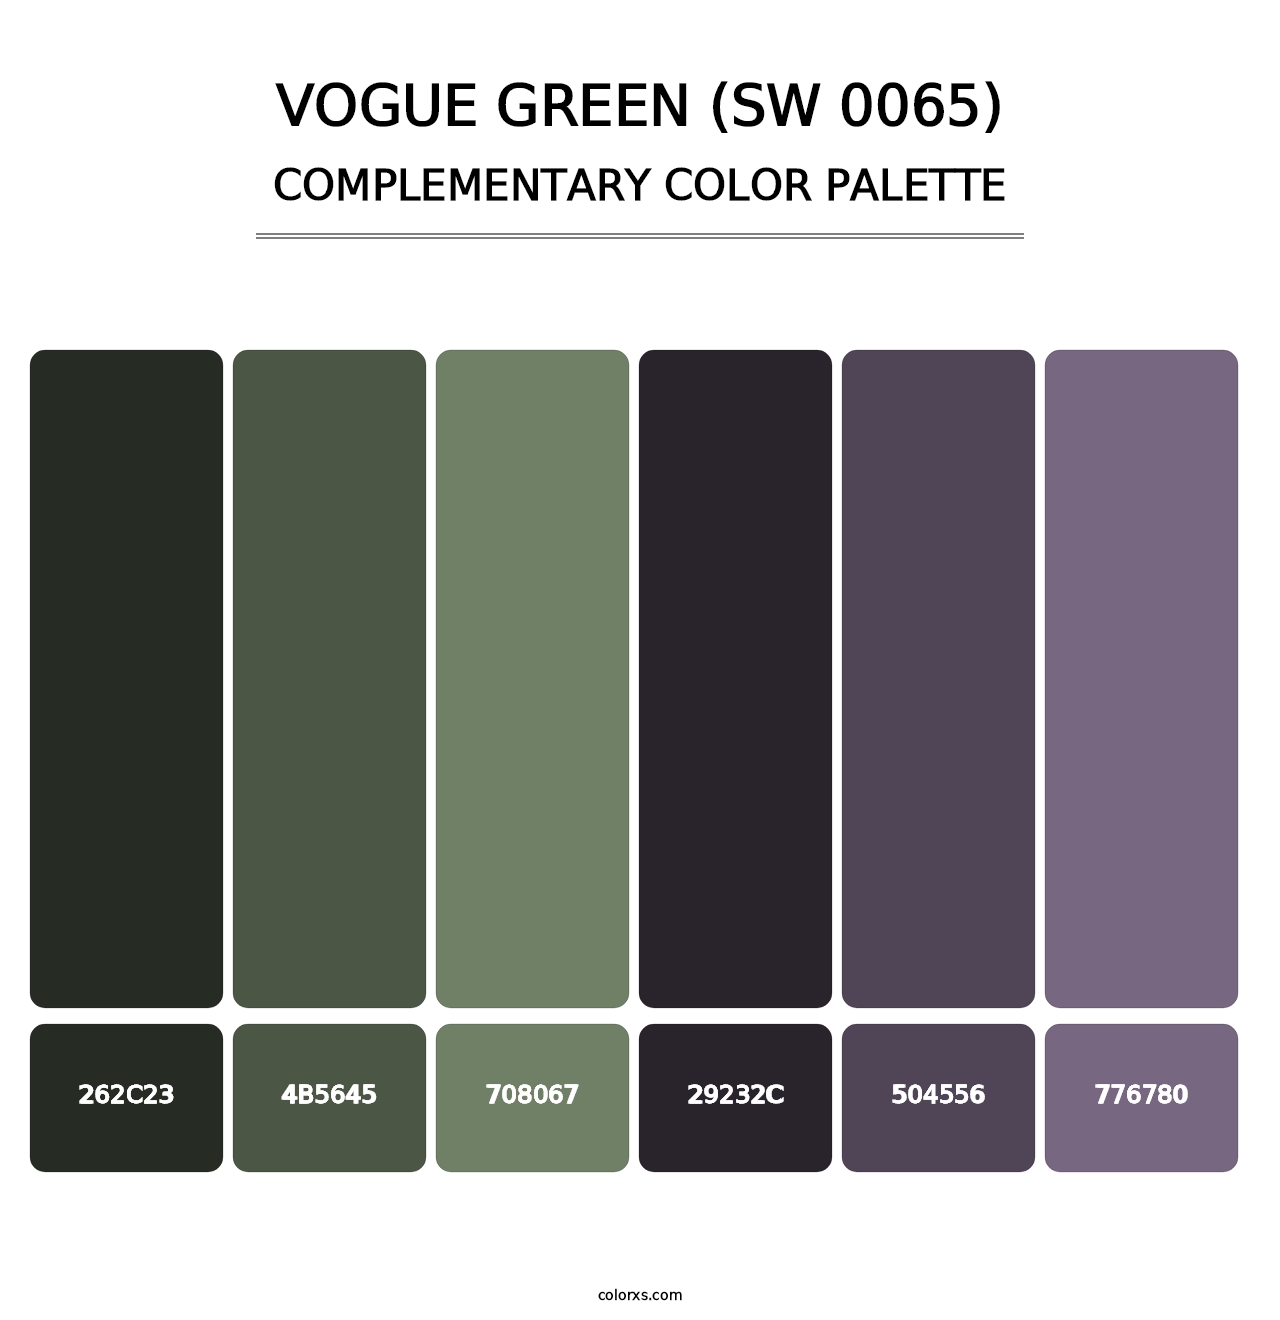 Vogue Green (SW 0065) - Complementary Color Palette